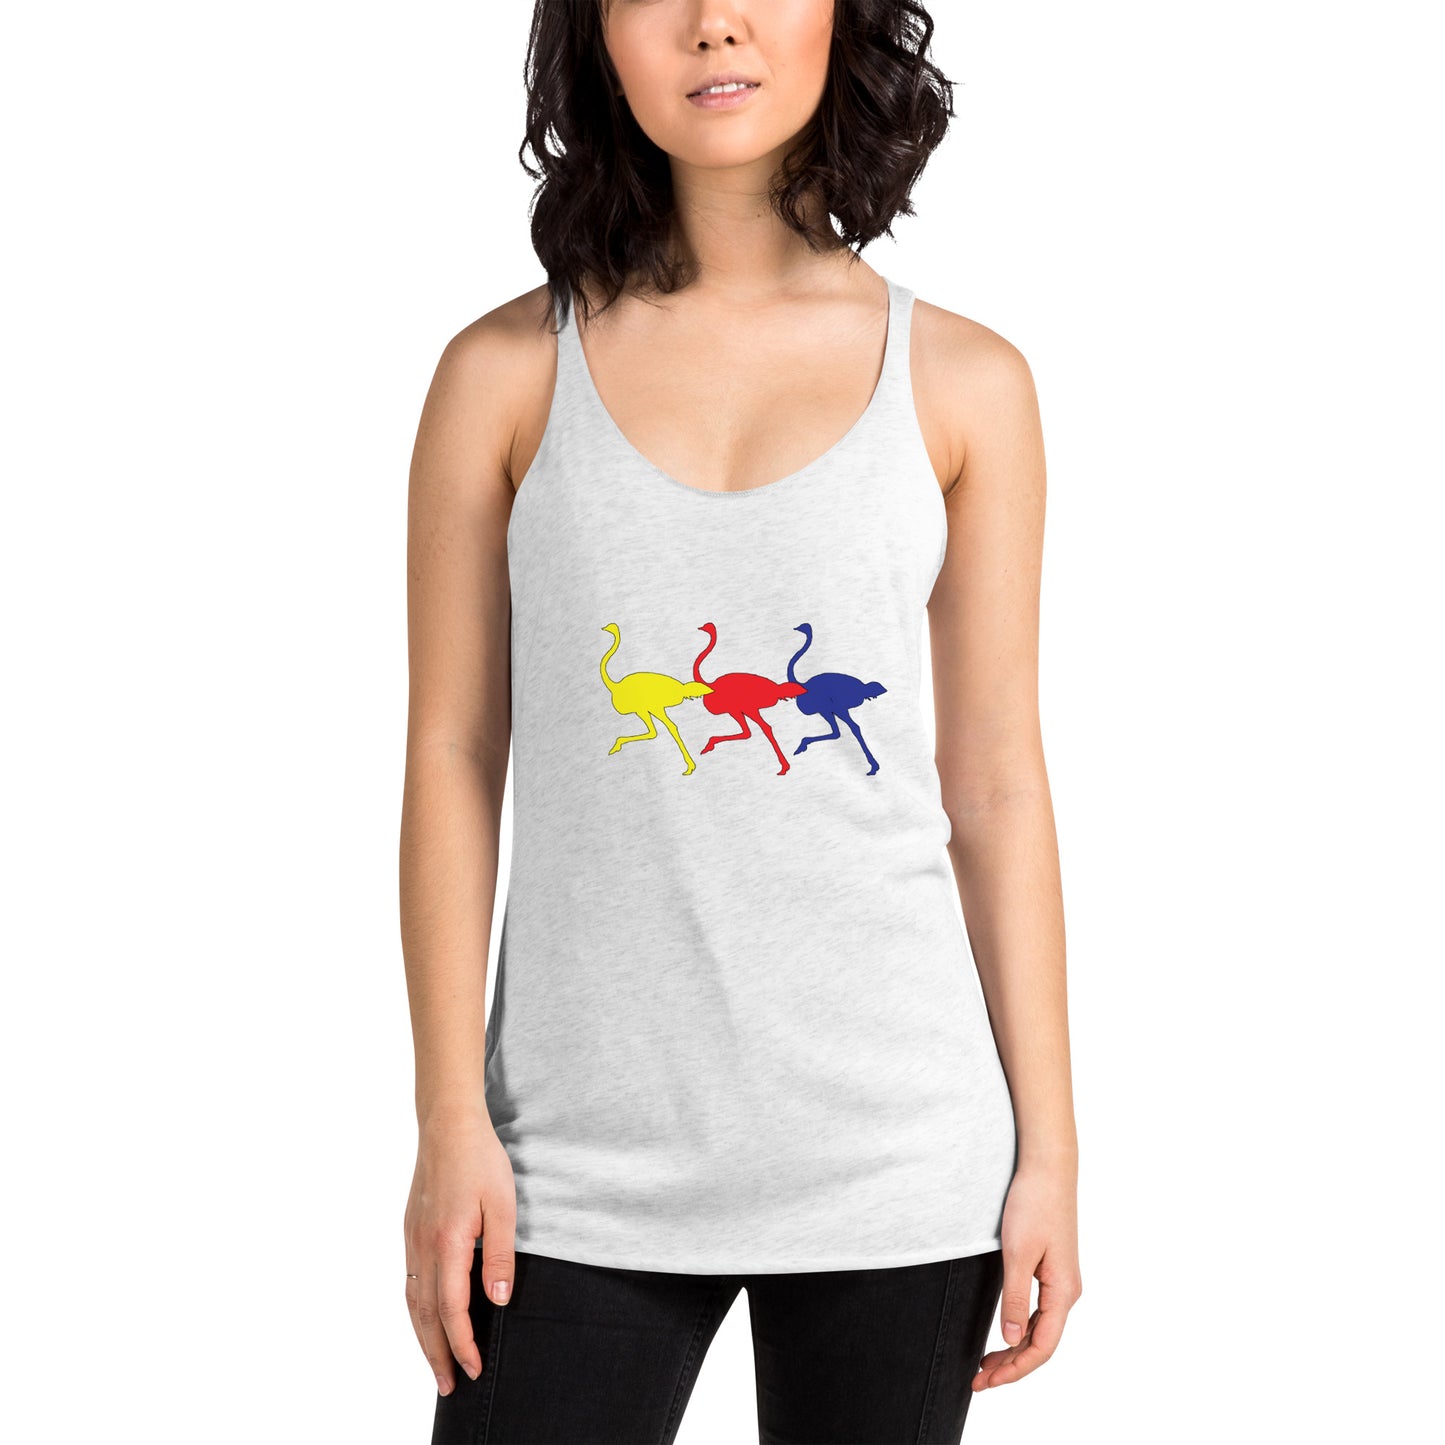 Womens Racerback Tank Top Printed with Colouful Running Ostriches